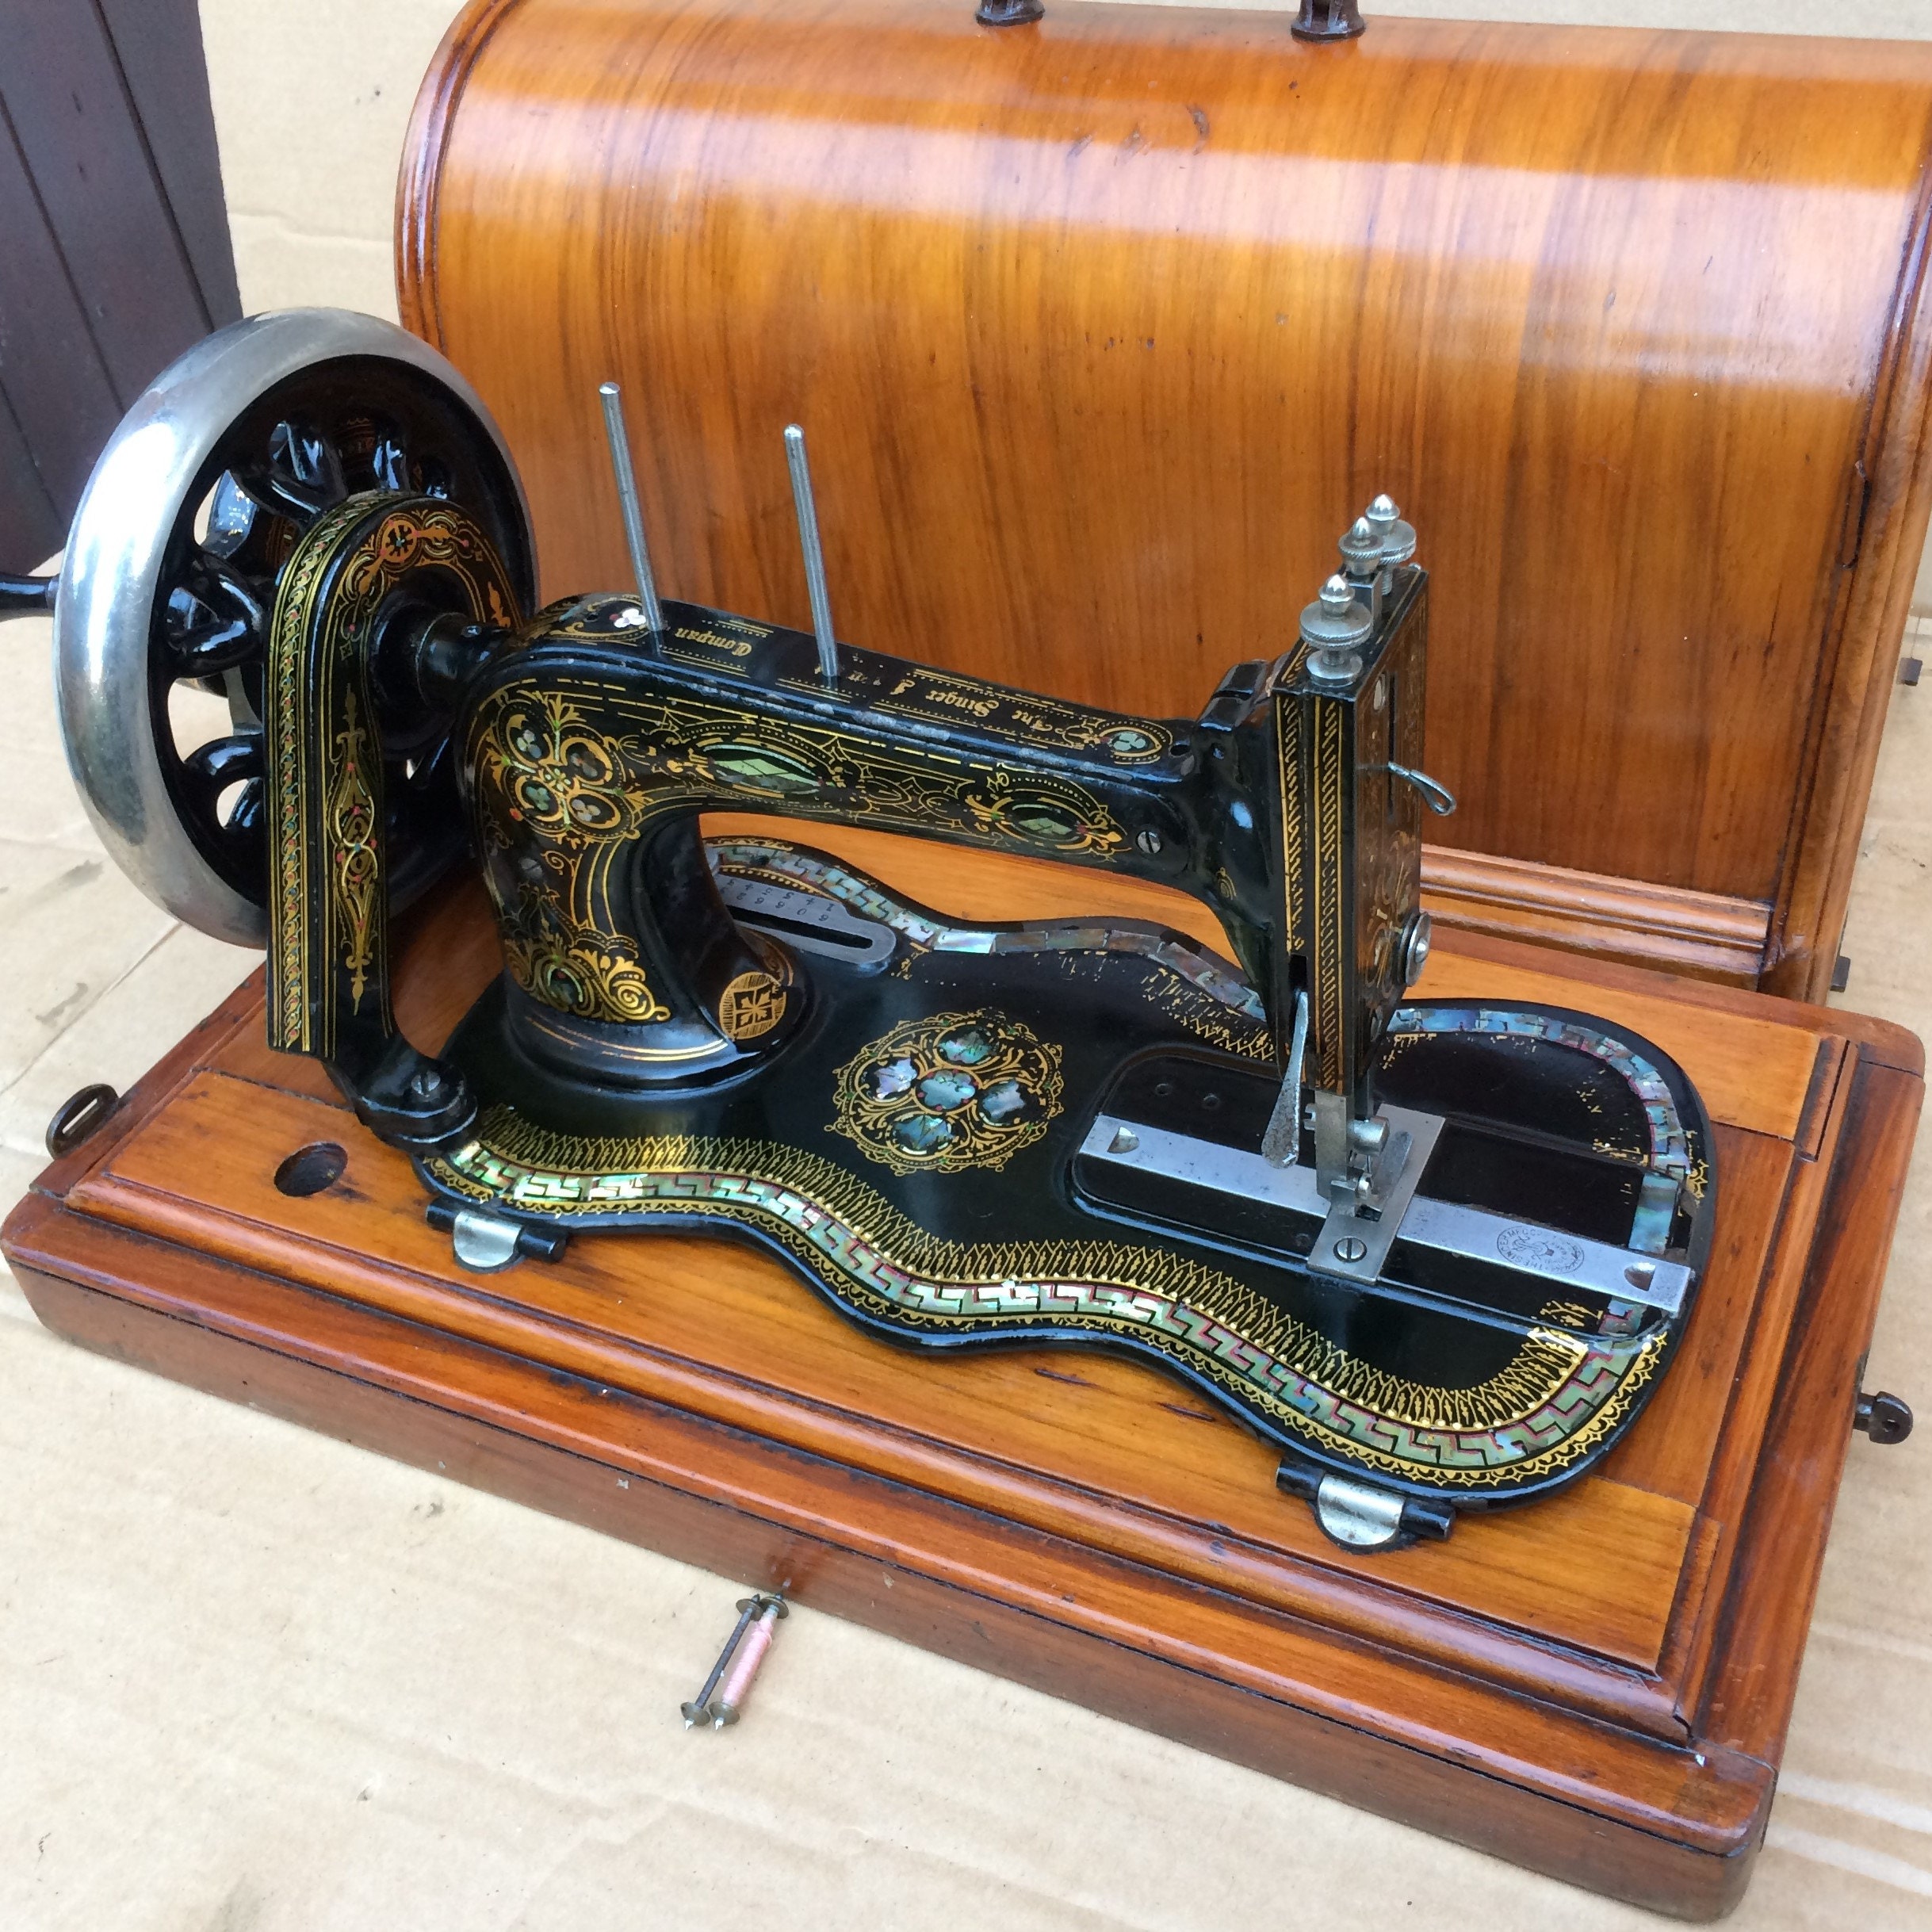 SINGER Sewing Machine Tiger Wood Bentwood Carrying Case for 15 15-91 201  201-2 66 316 Restored by 3FTERS 